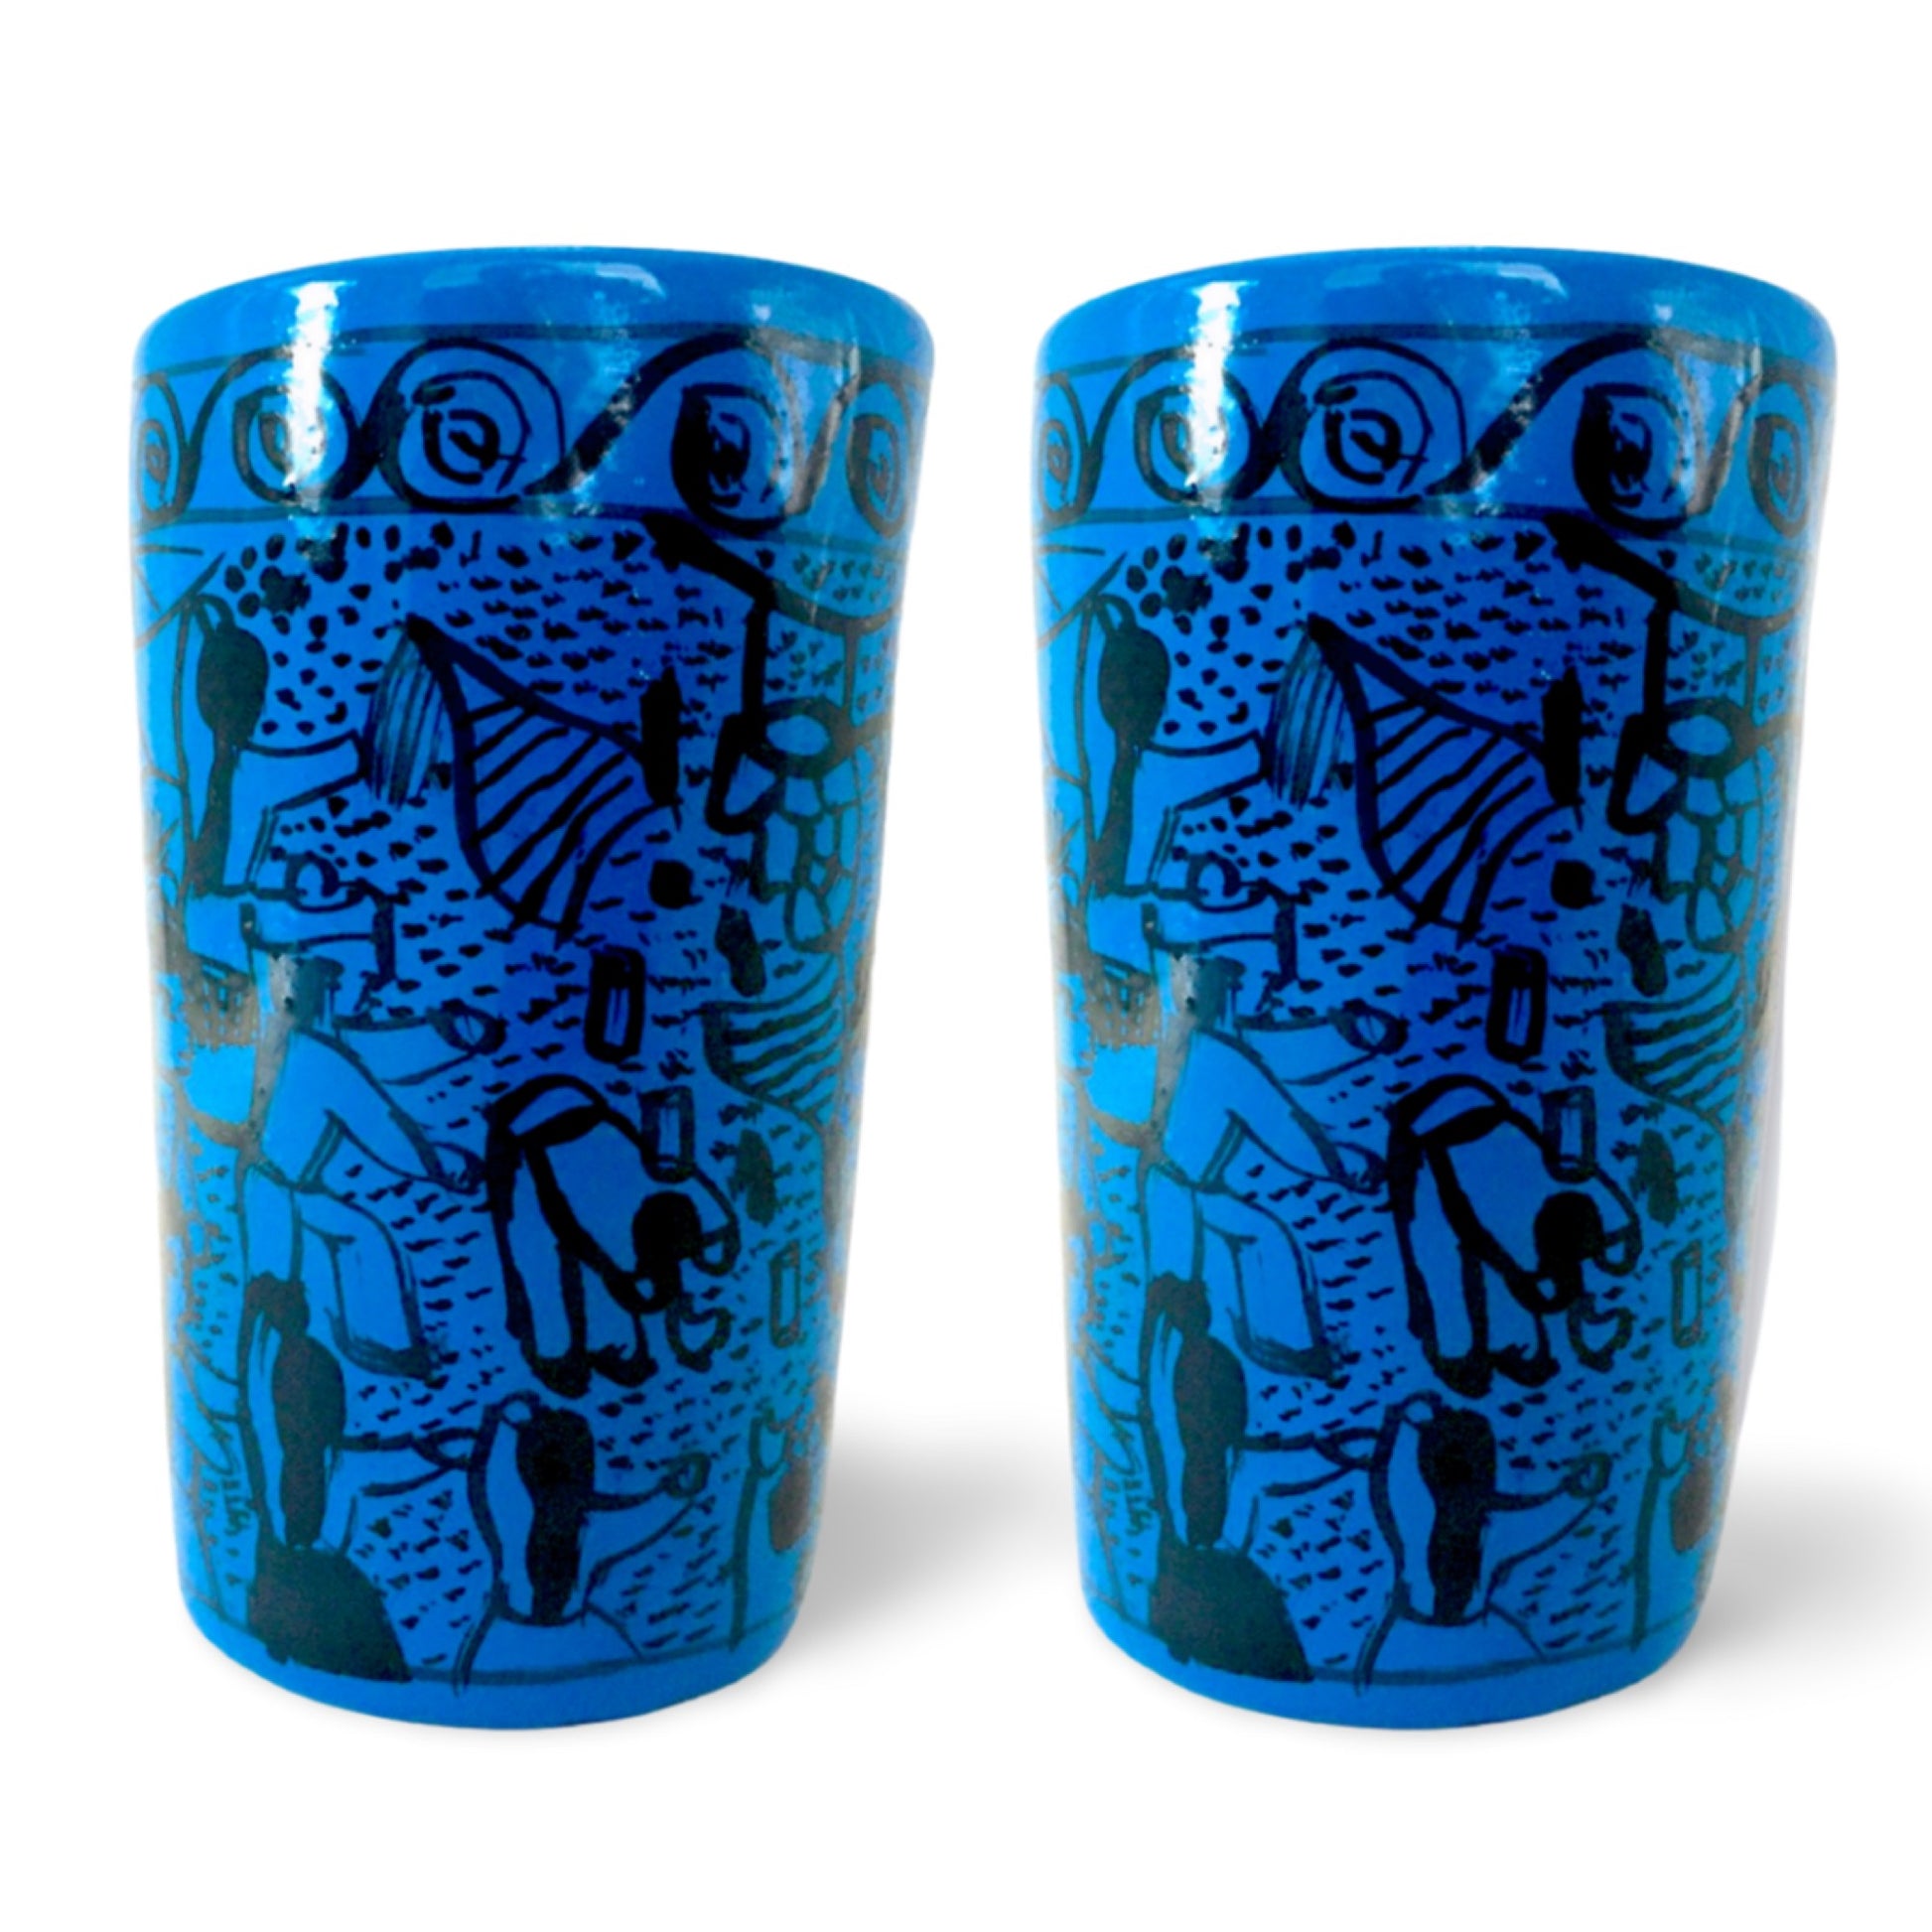 Blue ceramic shot glasses, individually hand-painted in Mexico, perfect for tequila, mezcal, or other spirits, pack of 2.